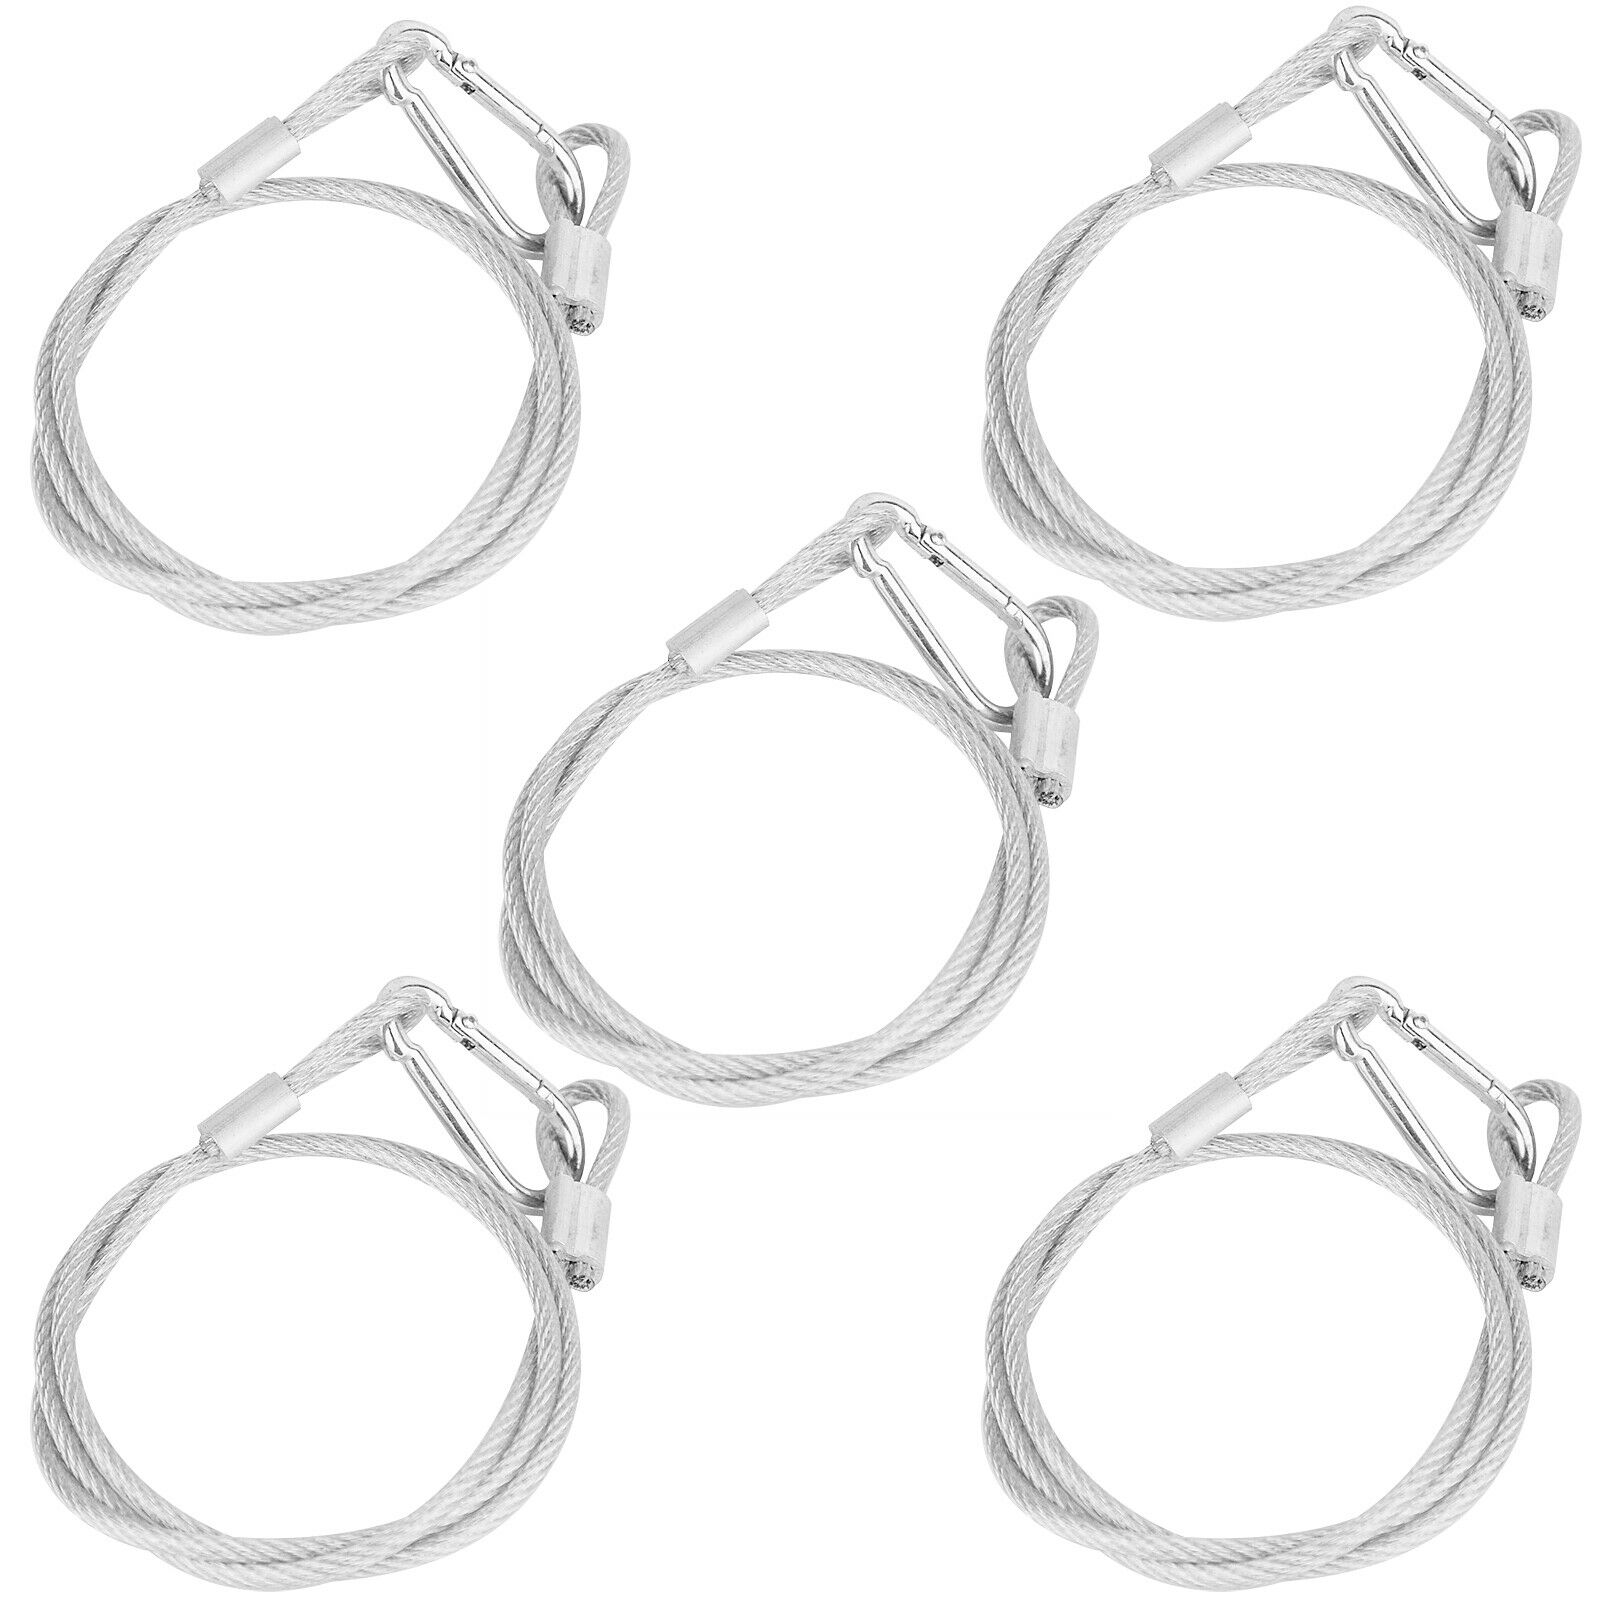 5 Packs 31"(80cm) Stainless Steel Safety Cables Rope W/ Buckle Pvc Coated 220lb